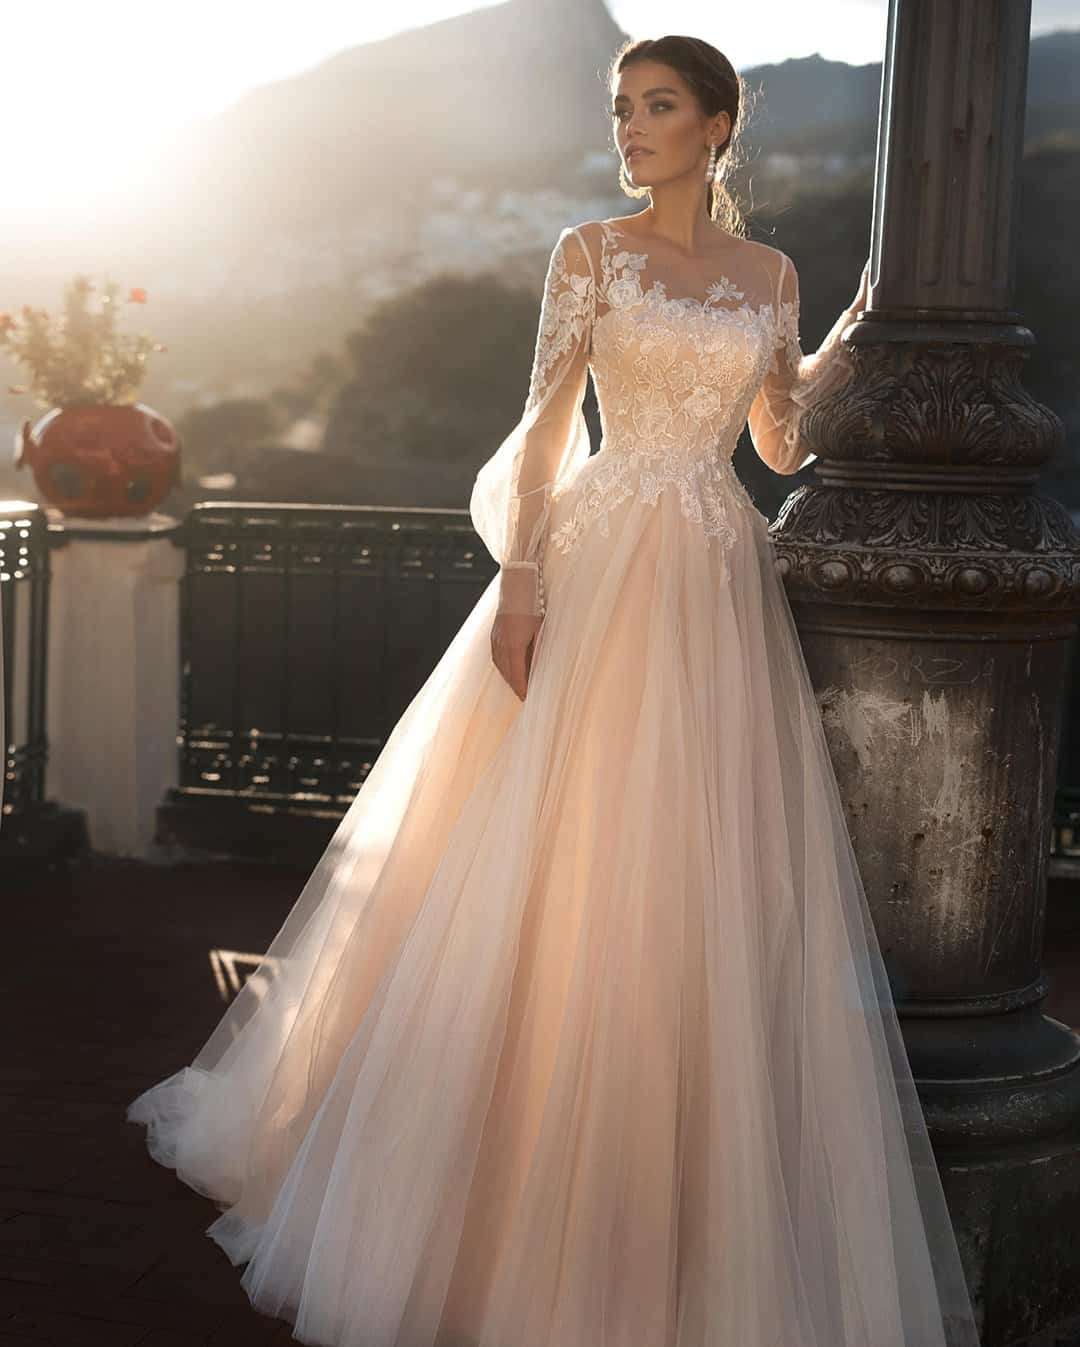 Gorgeous Bridal Gowns by Naviblue Bridal